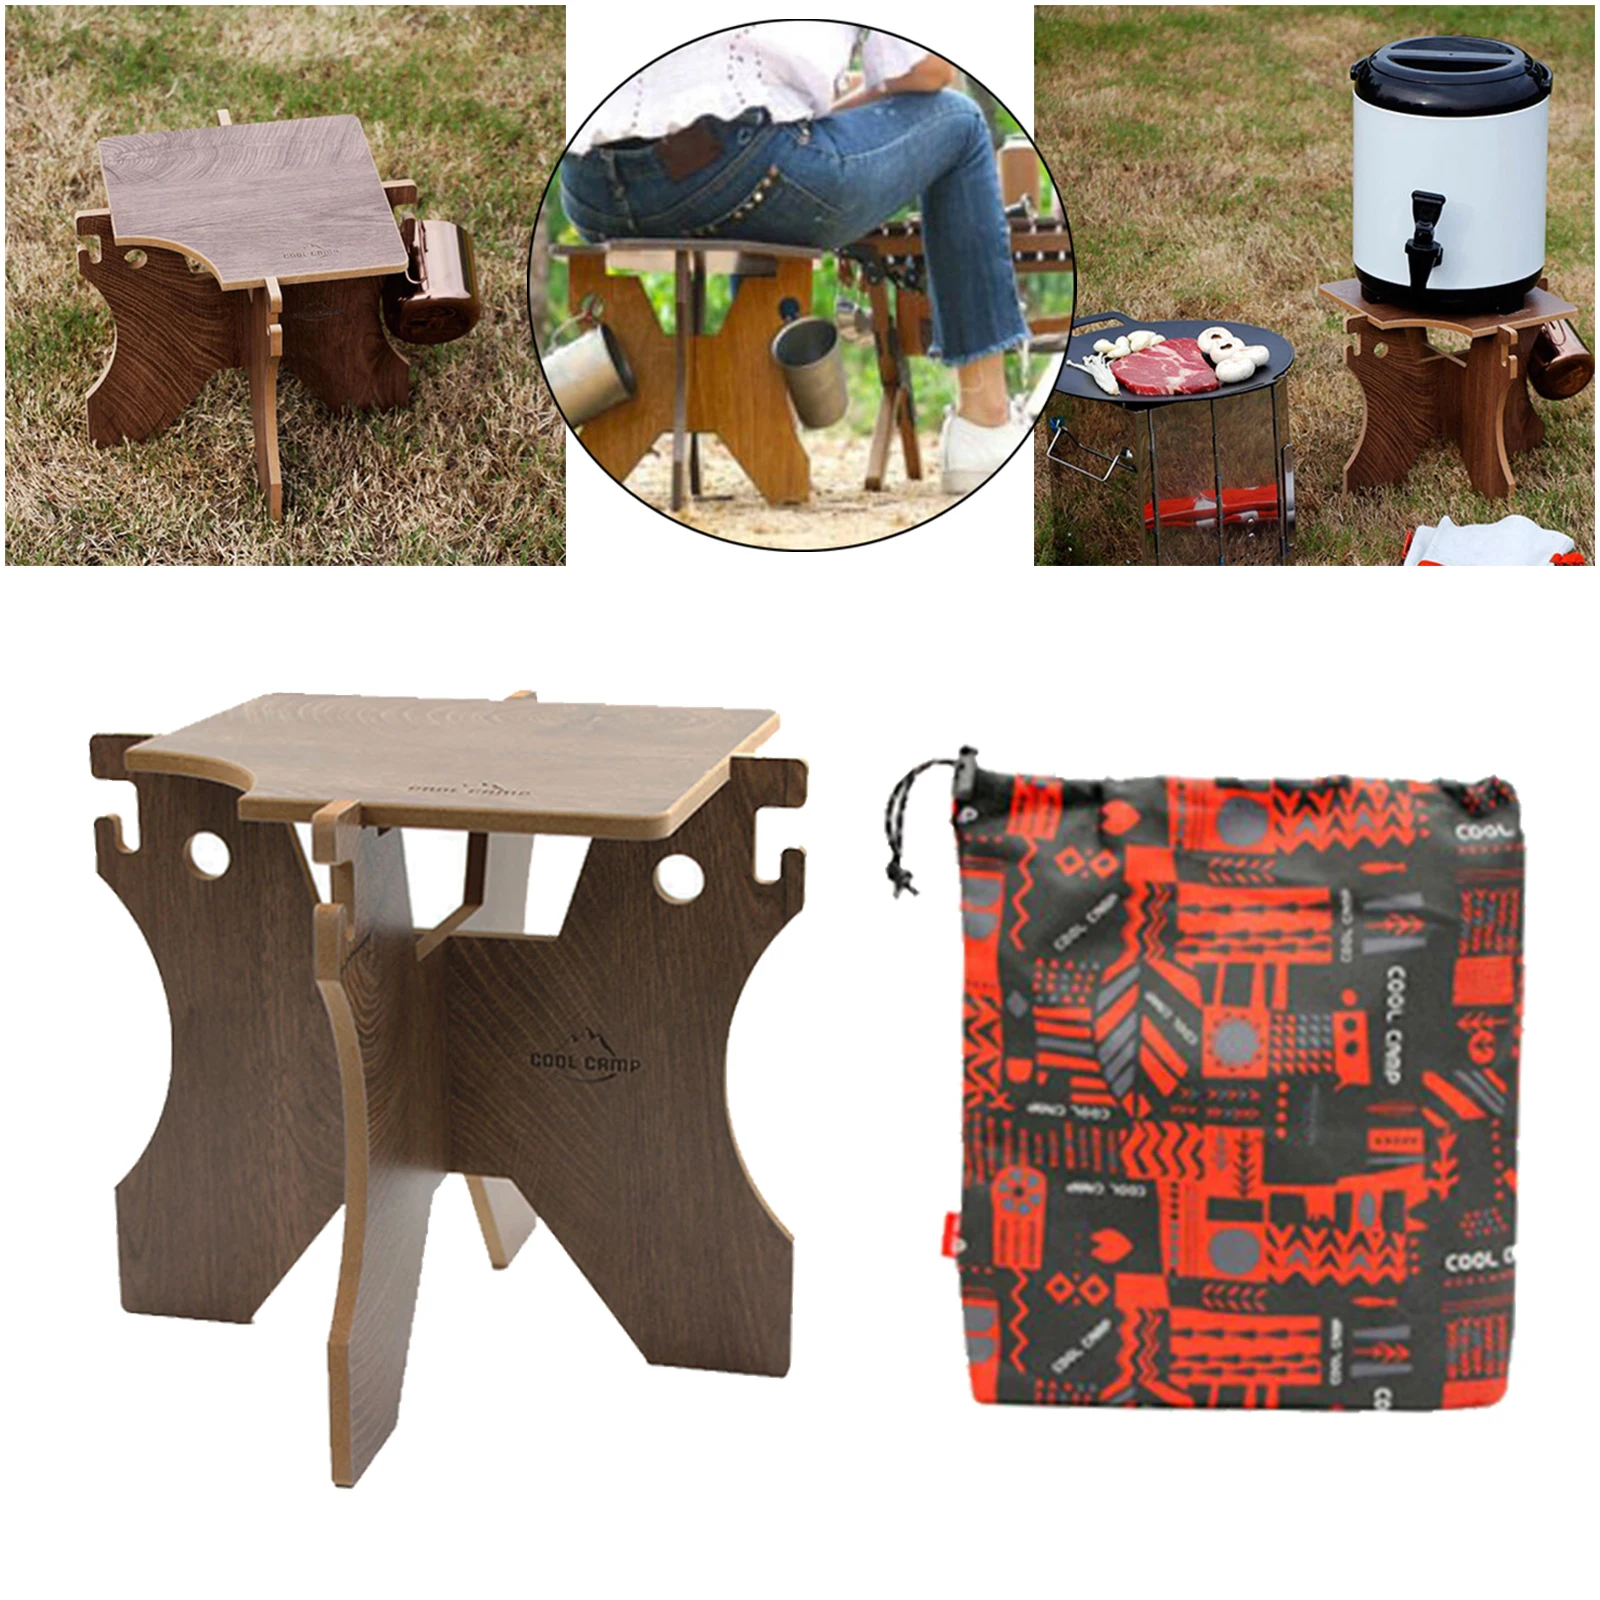 Foldable Camping Water Bucket Stand Wooden Beer Pail Holder Support Rack Frame Shelf Cup Hanger Hooks Folding Stool Chair